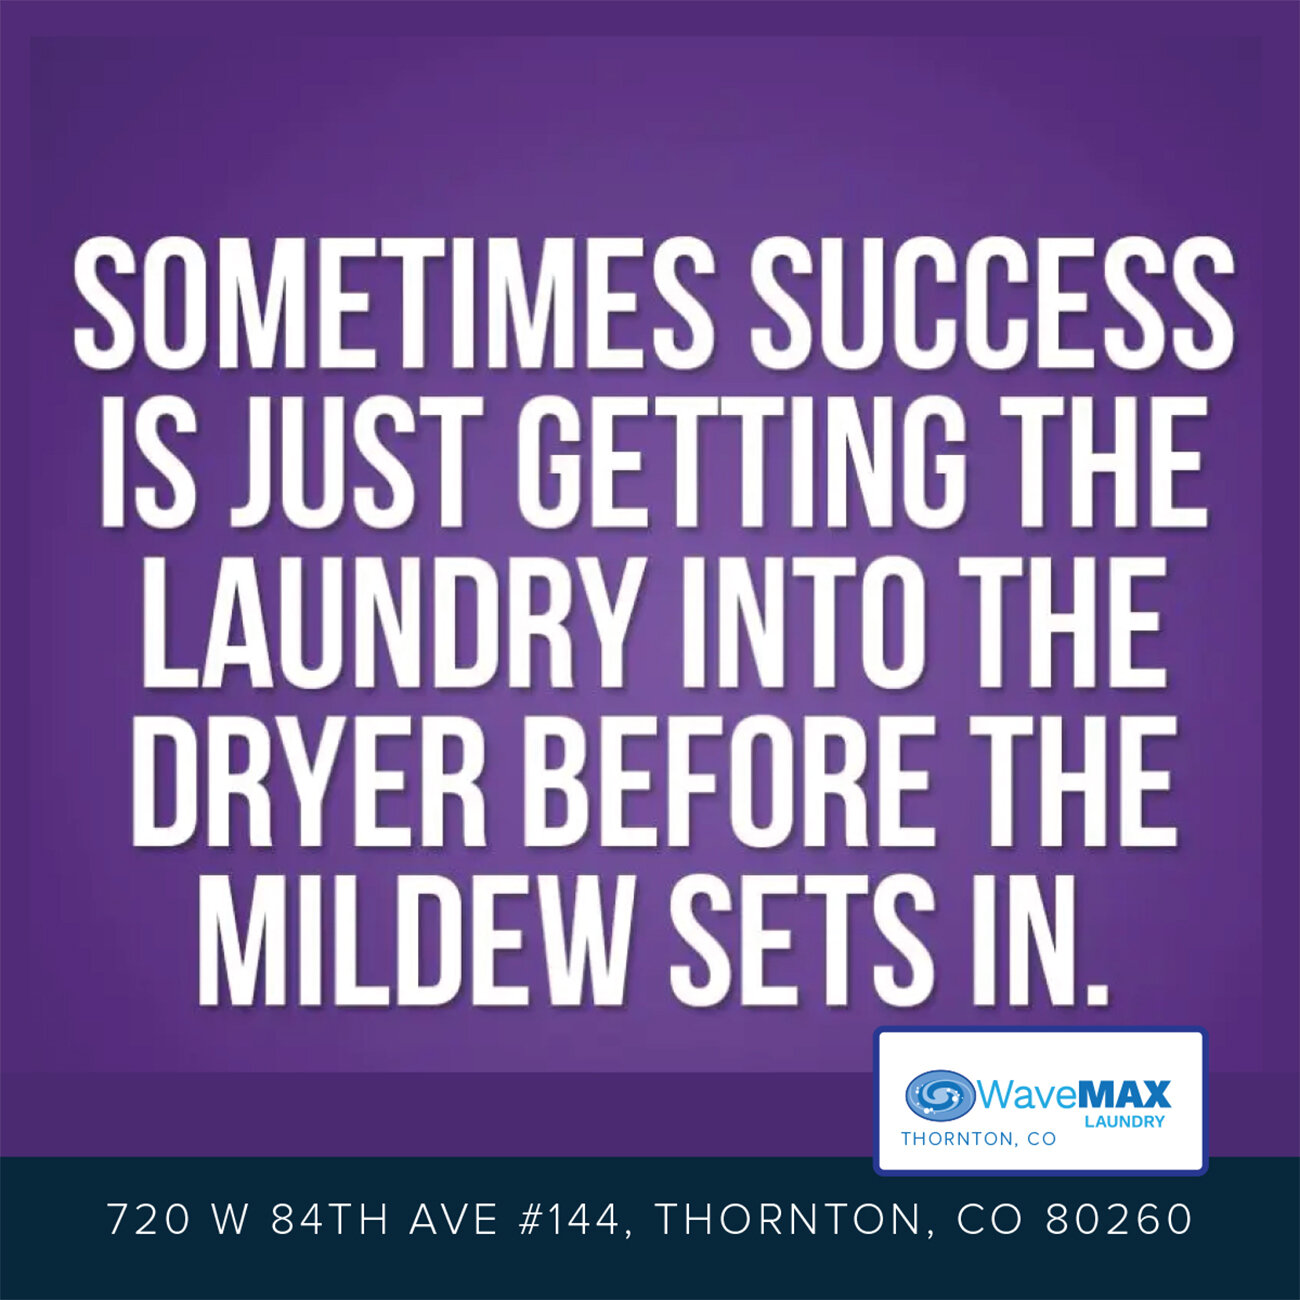 A little Friday joke&hellip;we always get the laundry in the dryer before the mildew sets in because we do it immediately. We are the professional for all of you laundry needs. We know you have more important things to do than chores.